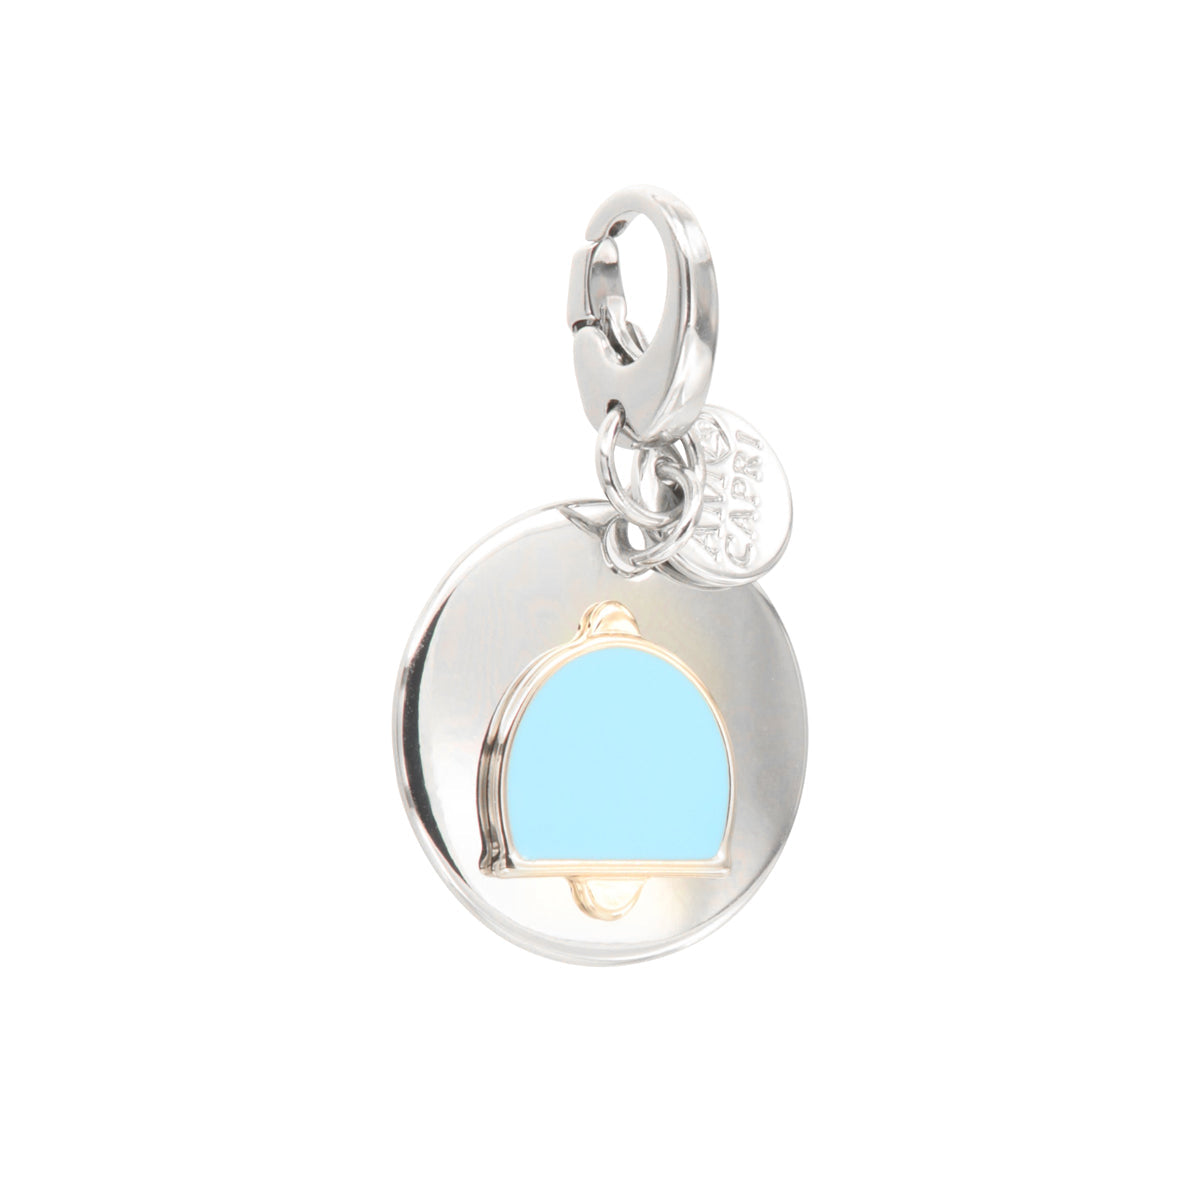 Metal pendant in medallion with turquoise enamel bell symbol